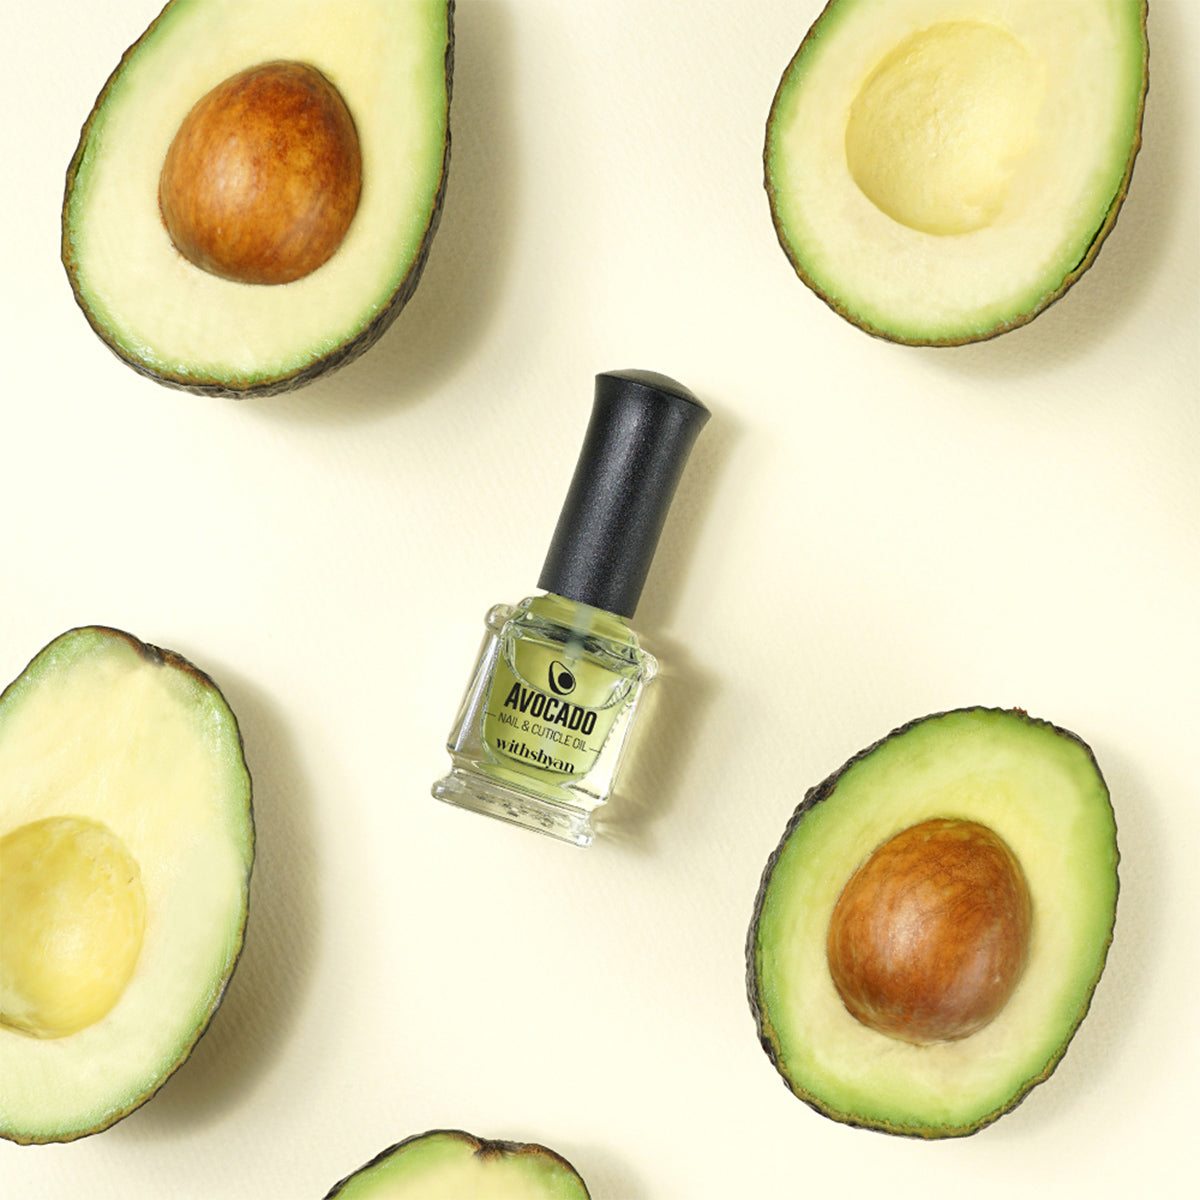 WithShyan Avocado Nail & Cuticle Oil 1